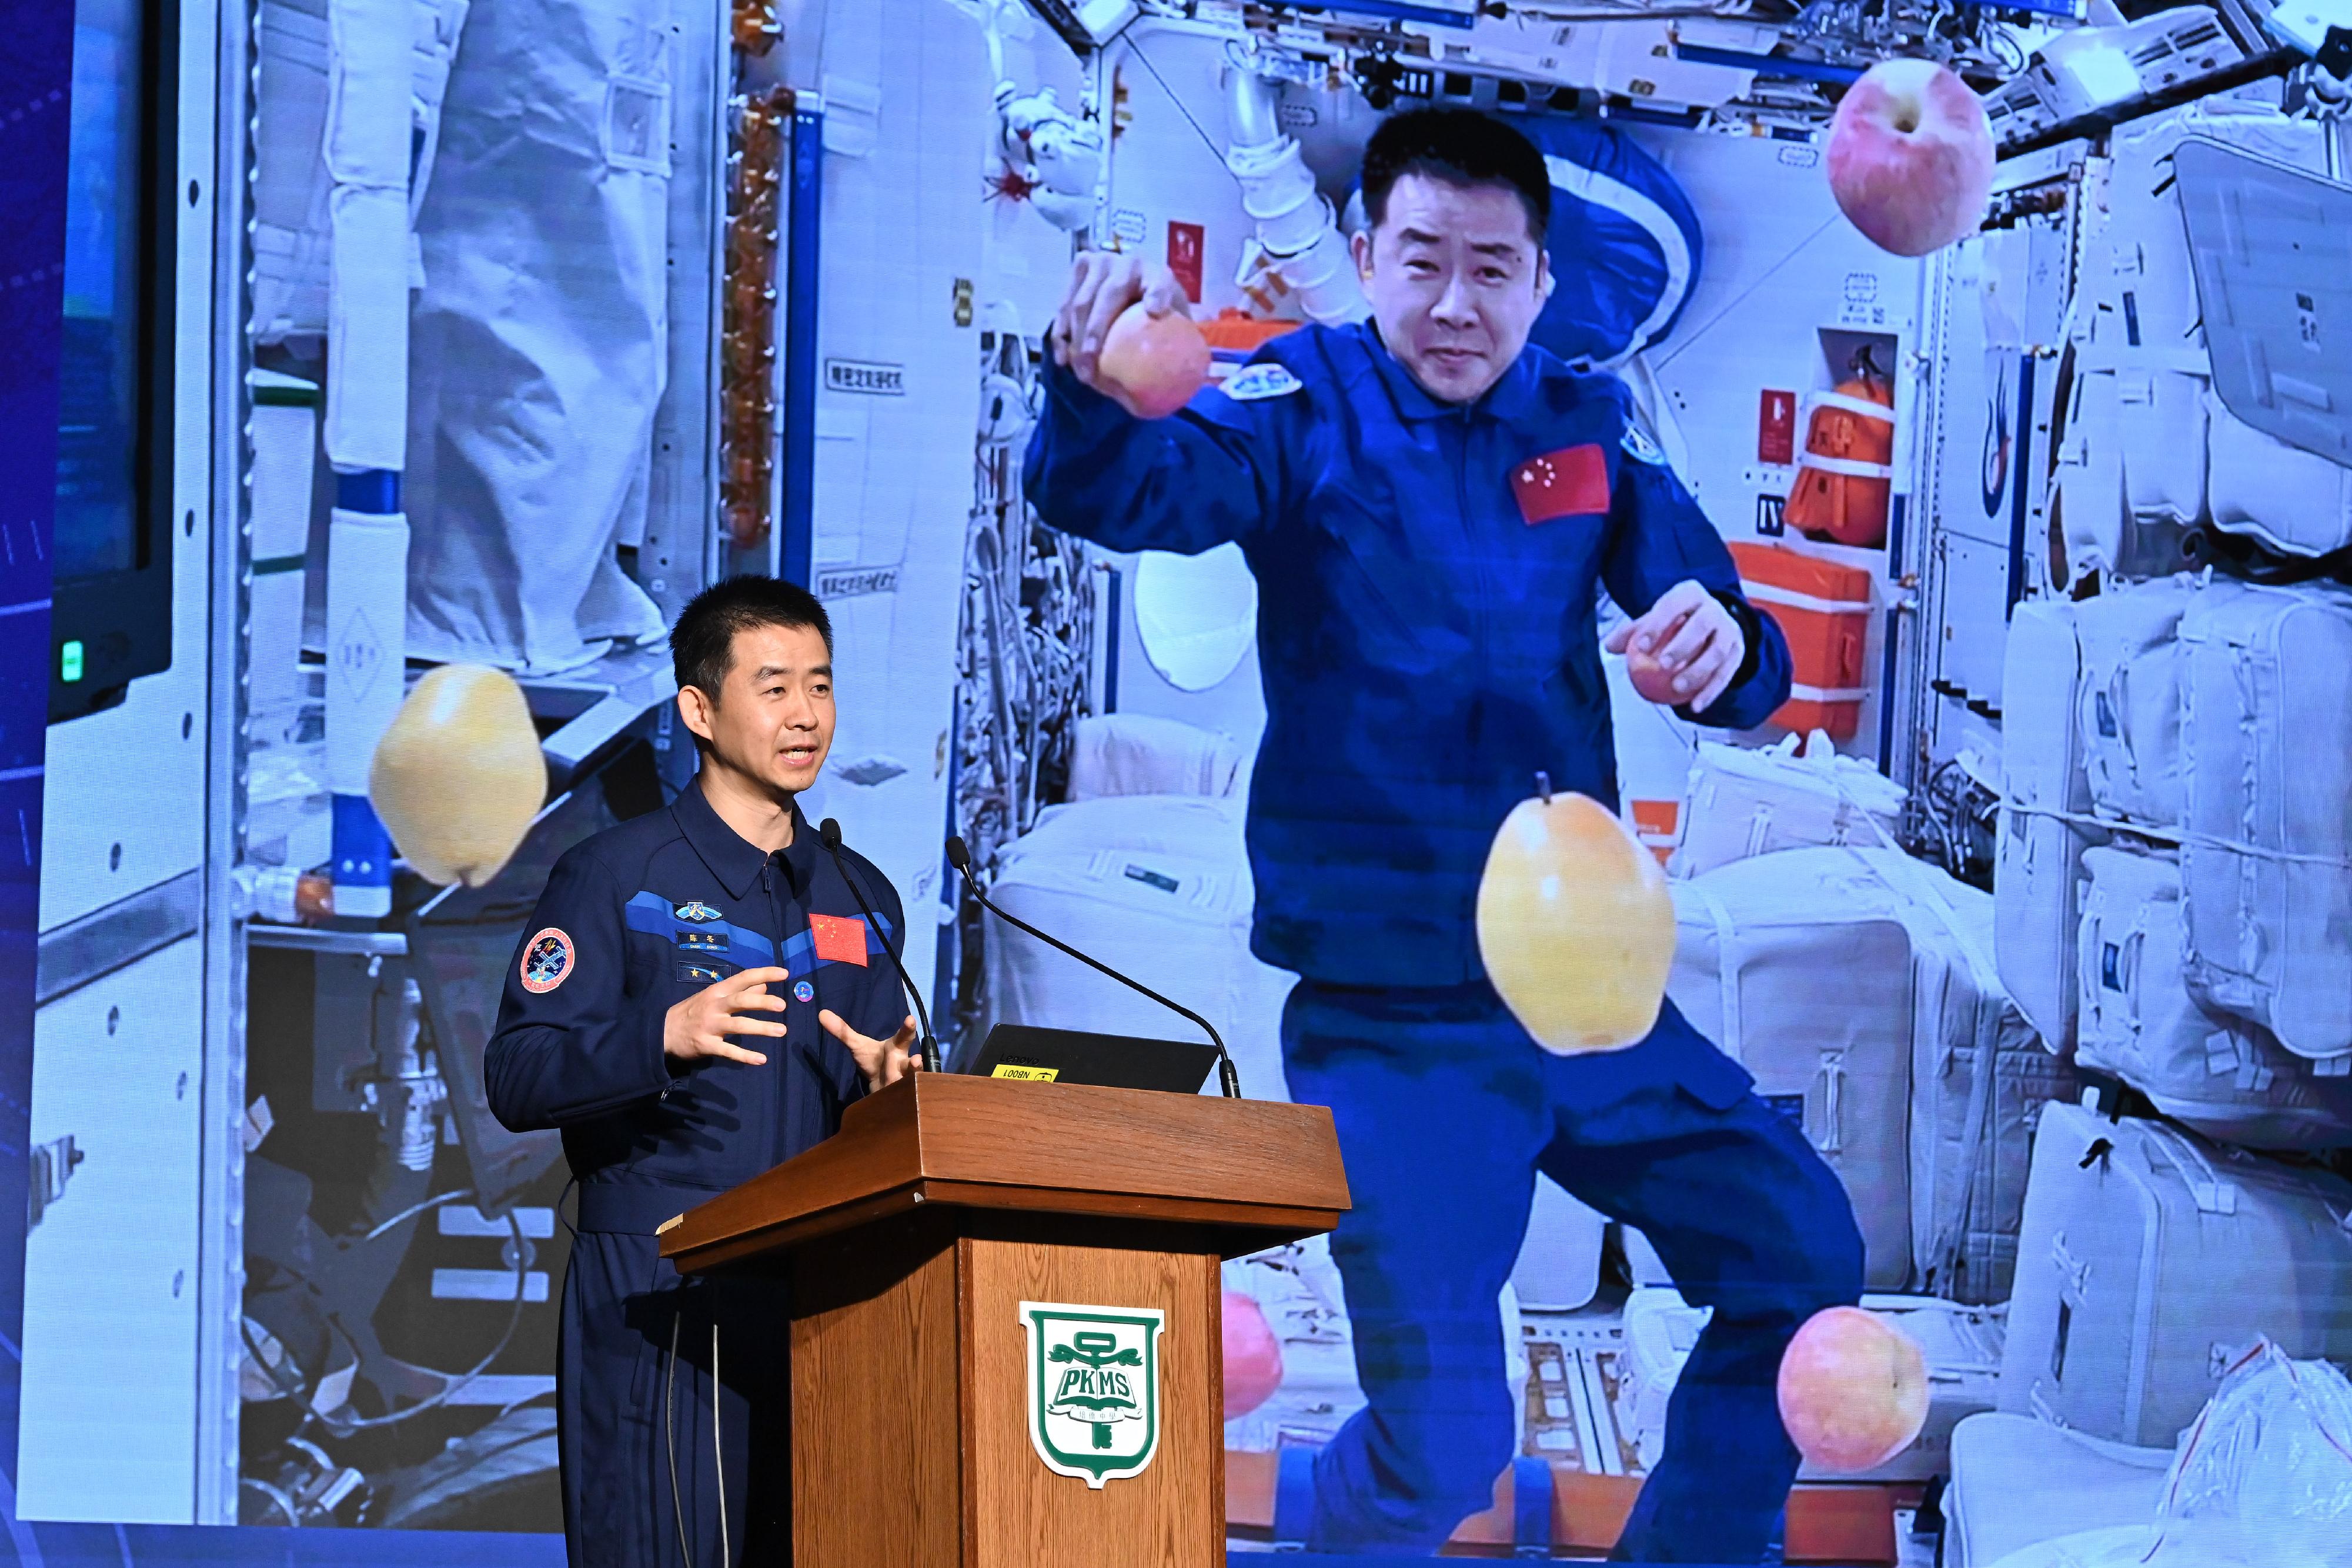 The China Manned Space delegation continued their visit in Hong Kong today (November 29). Photo shows Shenzhou-14 mission commander Mr Chen Dong attending a dialogue session with students at Pui Kiu Middle School.